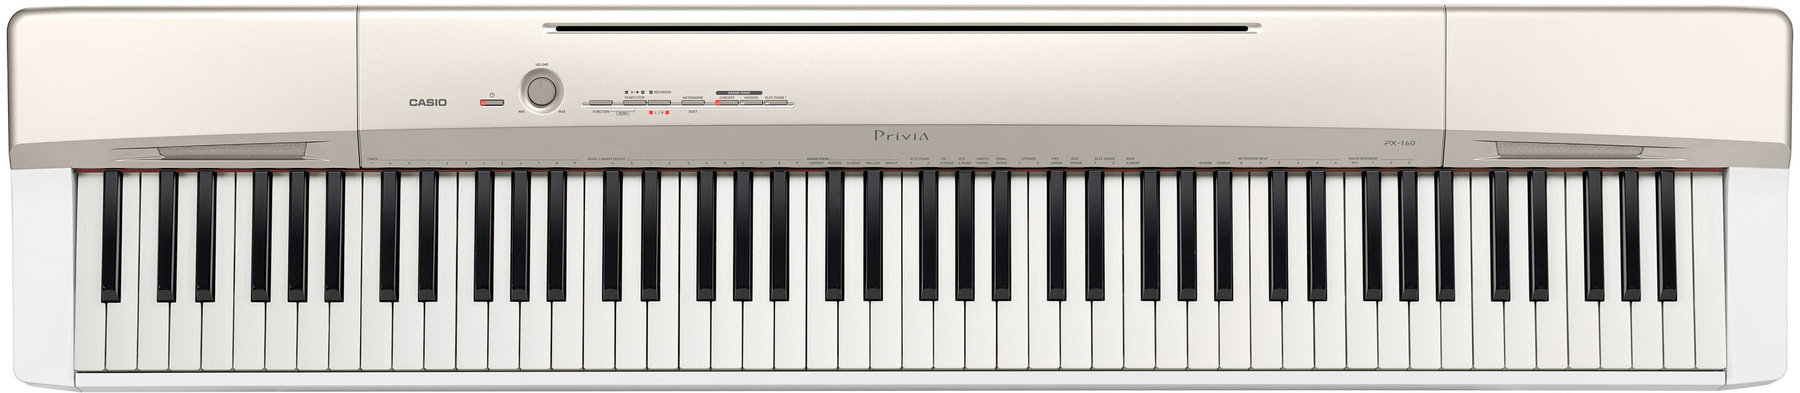 Cyfrowe stage pianino Casio PX-160GD Cyfrowe stage pianino